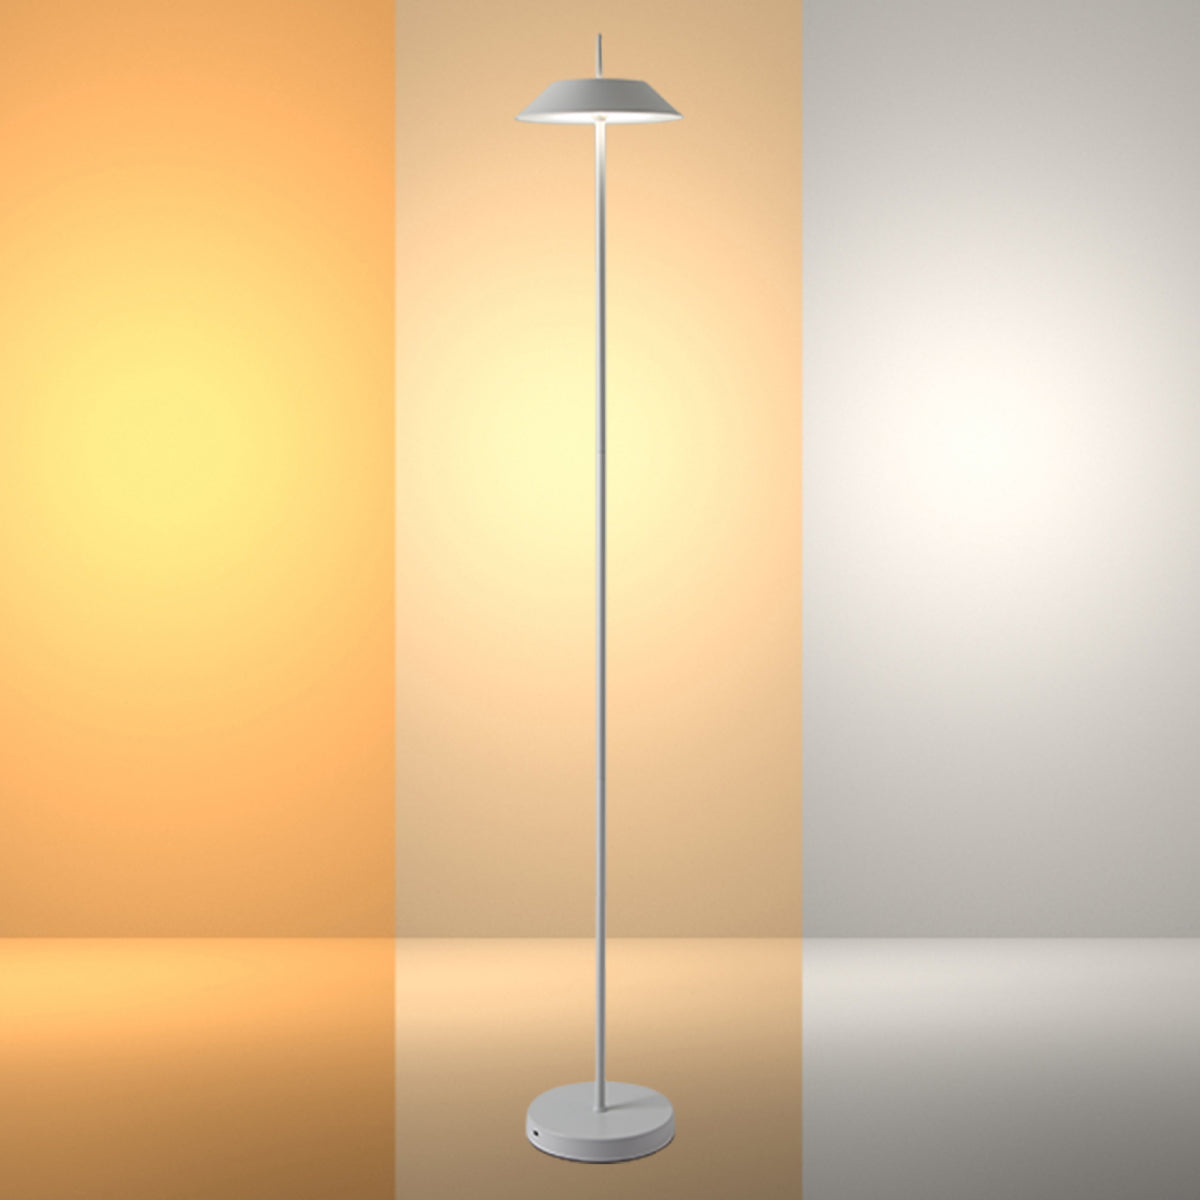 Main image of Portable LED Floor Lamp with Dimmable CCT - Sleek Design